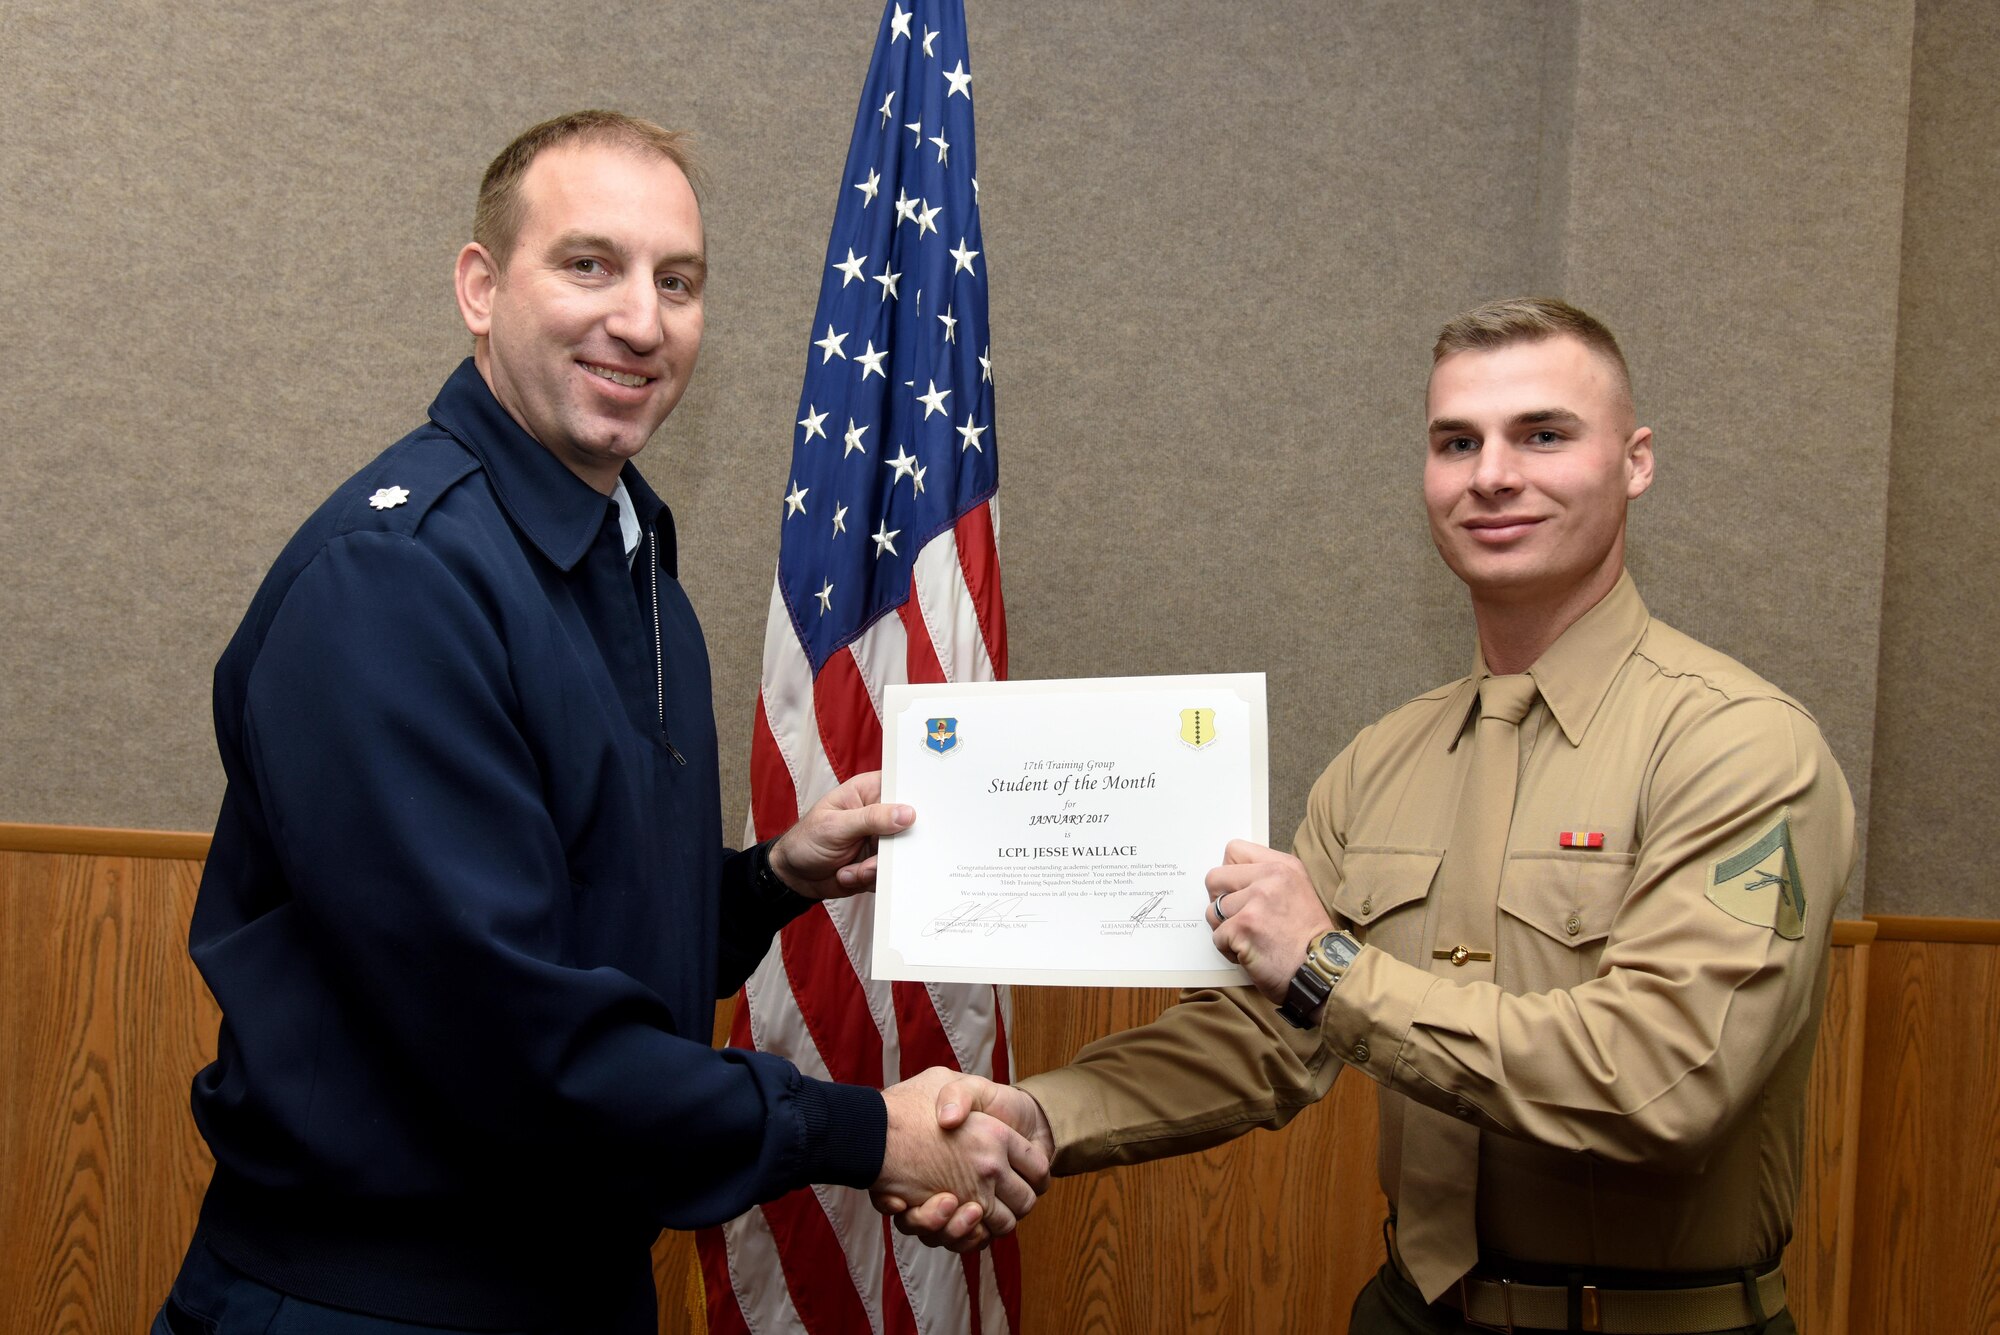 U.S. Air Force Lt. Col. Jason Kulchar, 315th Training Squadron director of operations, presents the 316th Training Squadron Student of the Month award for January 2017 to Lance Cpl. Jesse Wallace, 316th TRS student, in the Brandenburg Hall on Goodfellow Air Force Base, Texas, Feb. 3, 2017. (U.S. Air Force photo by Staff Sgt. Joshua Edwards/Released)